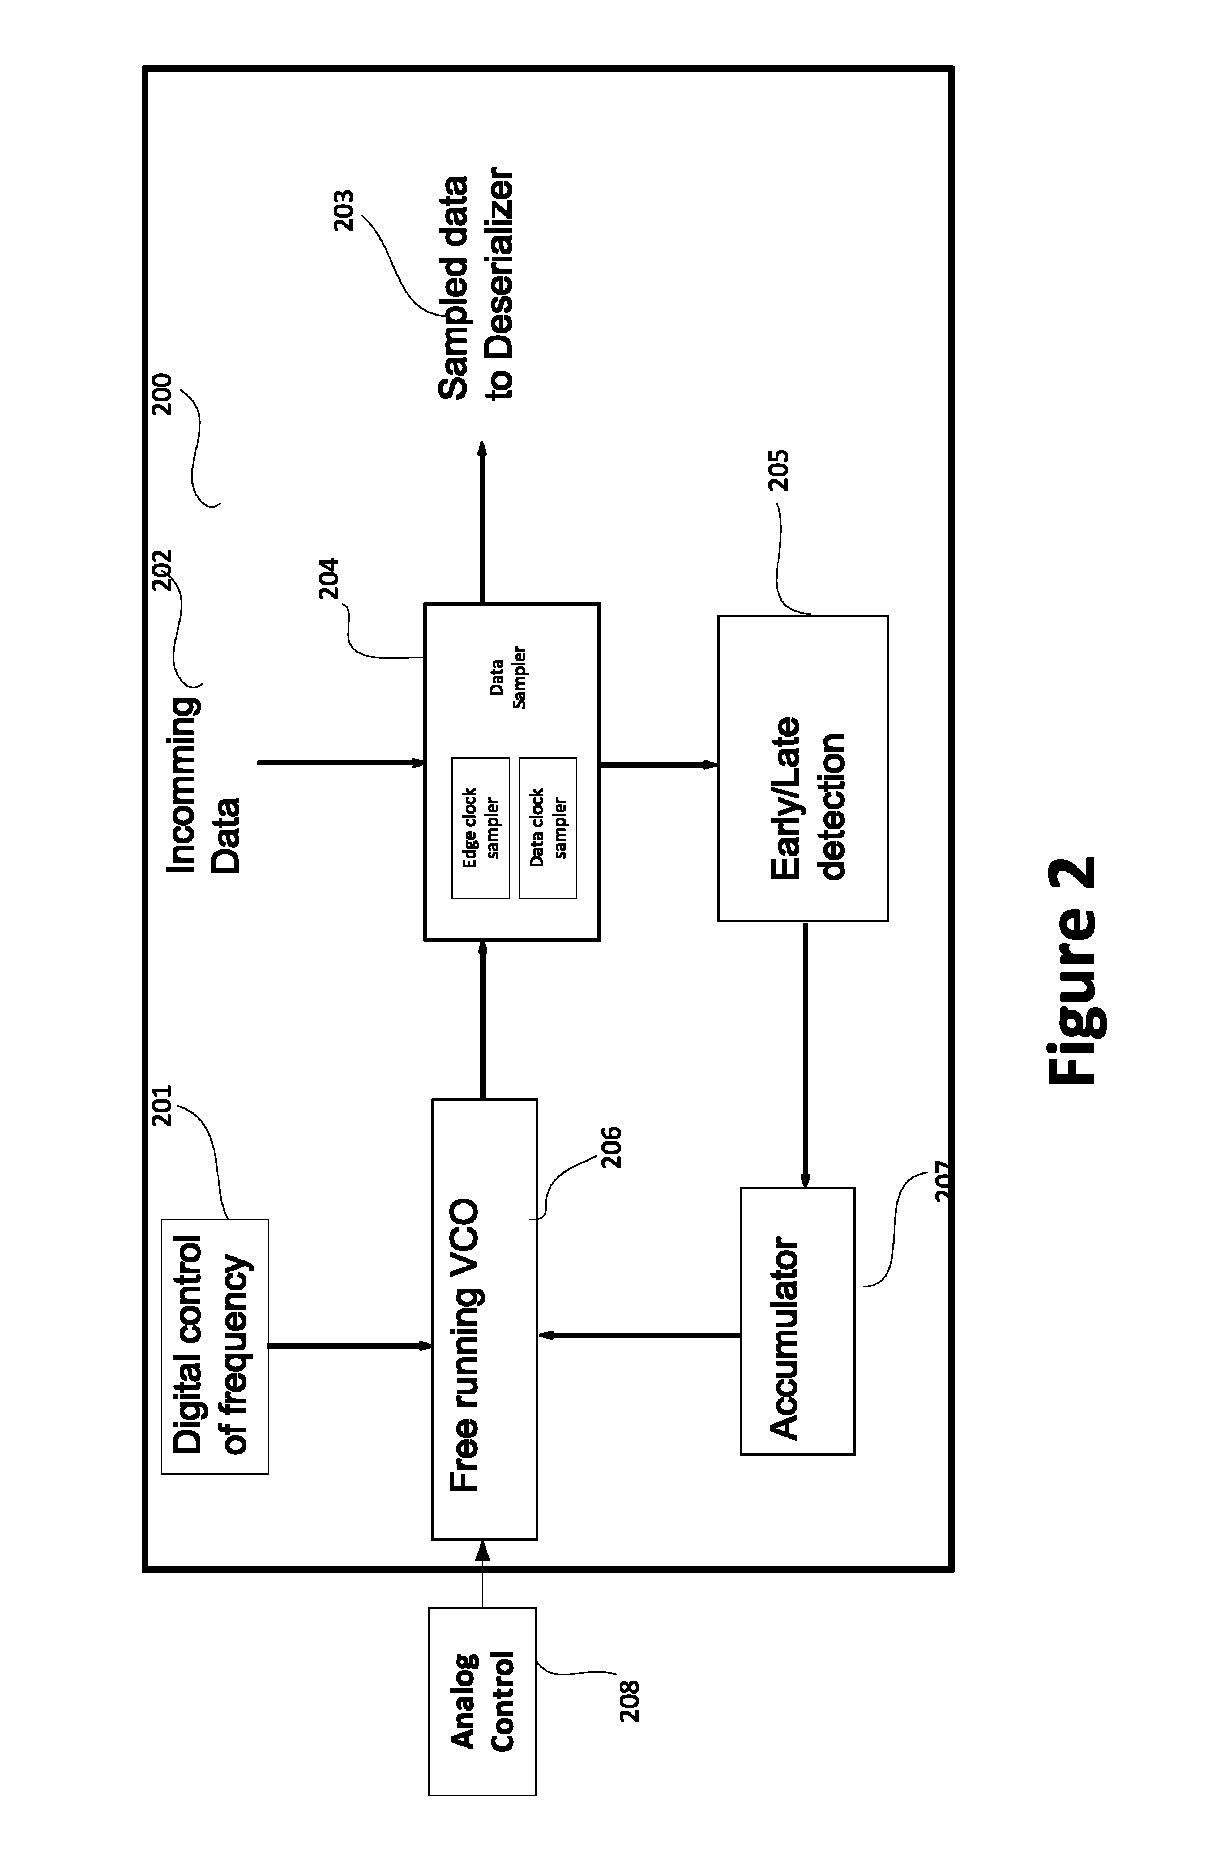 Frequency acquisition for SERDES receivers